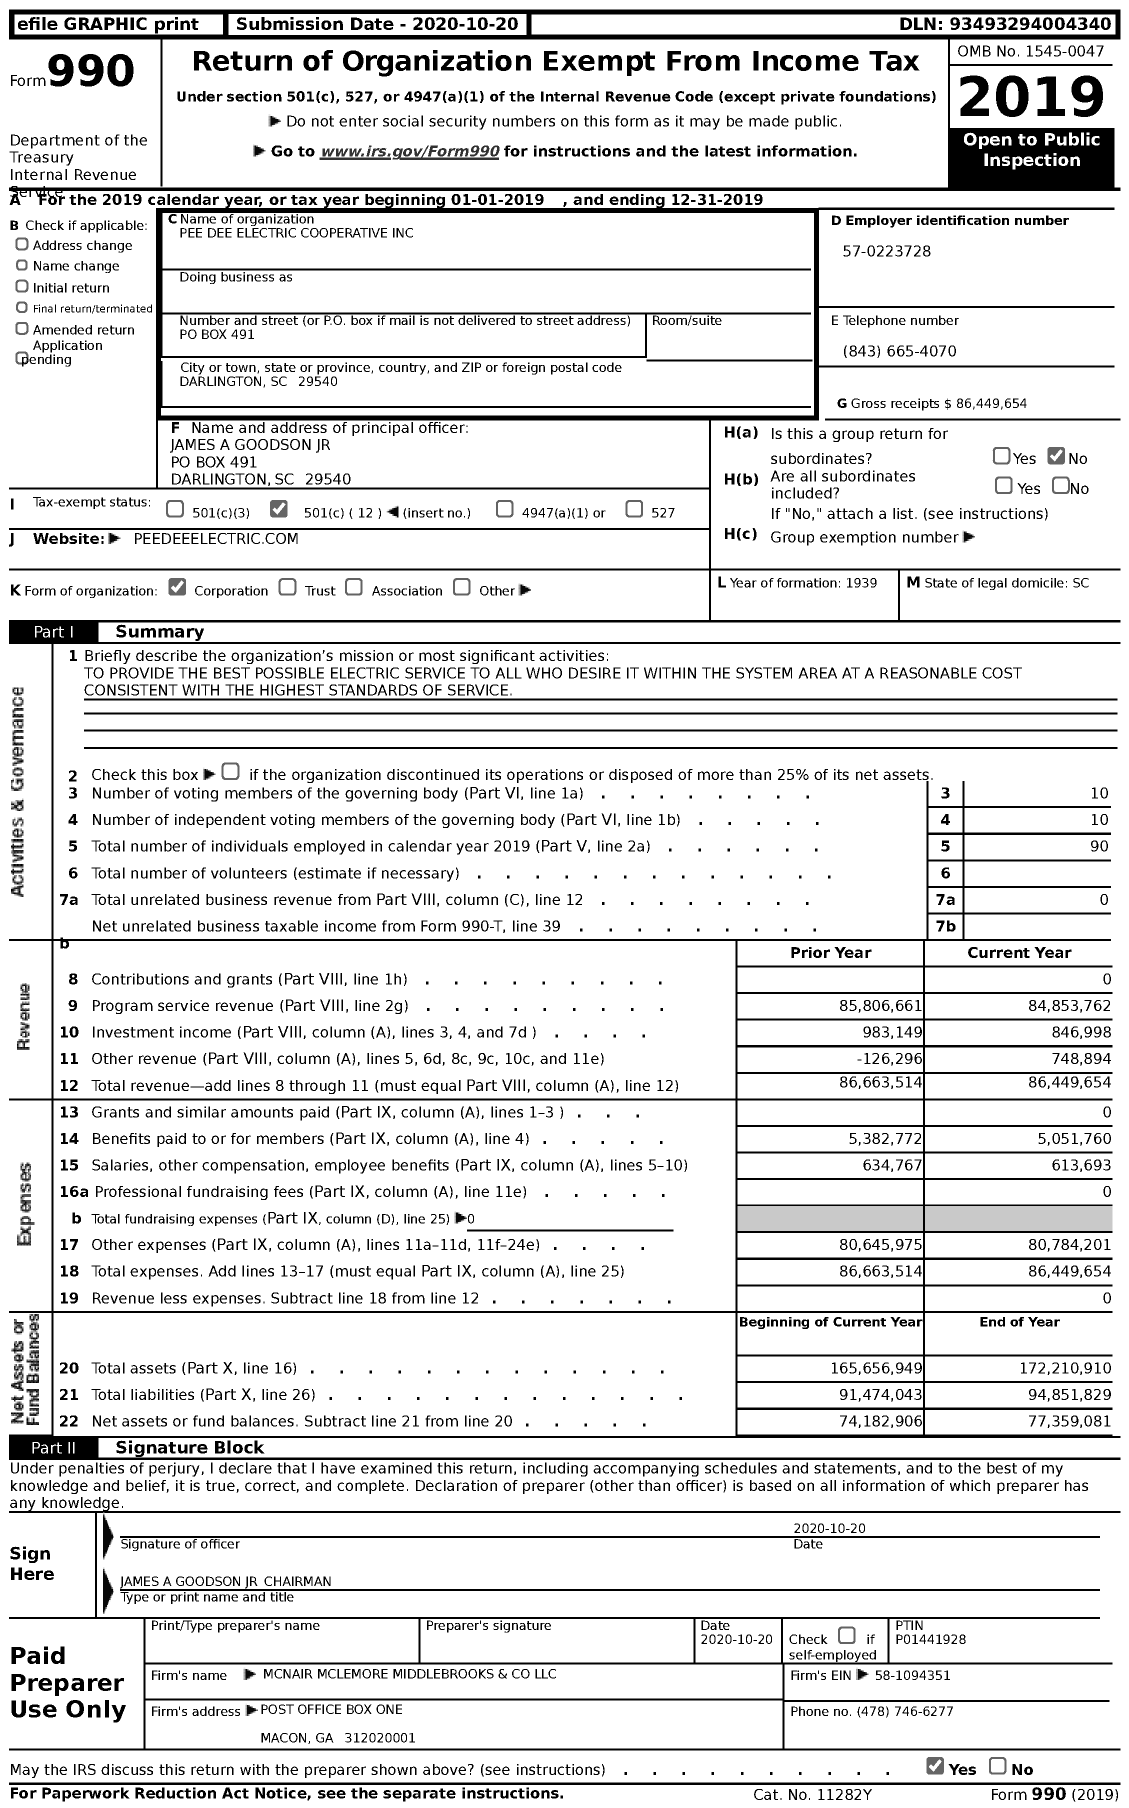 2019 Form 990 For Pee Dee Electric Cooperative Cause IQ